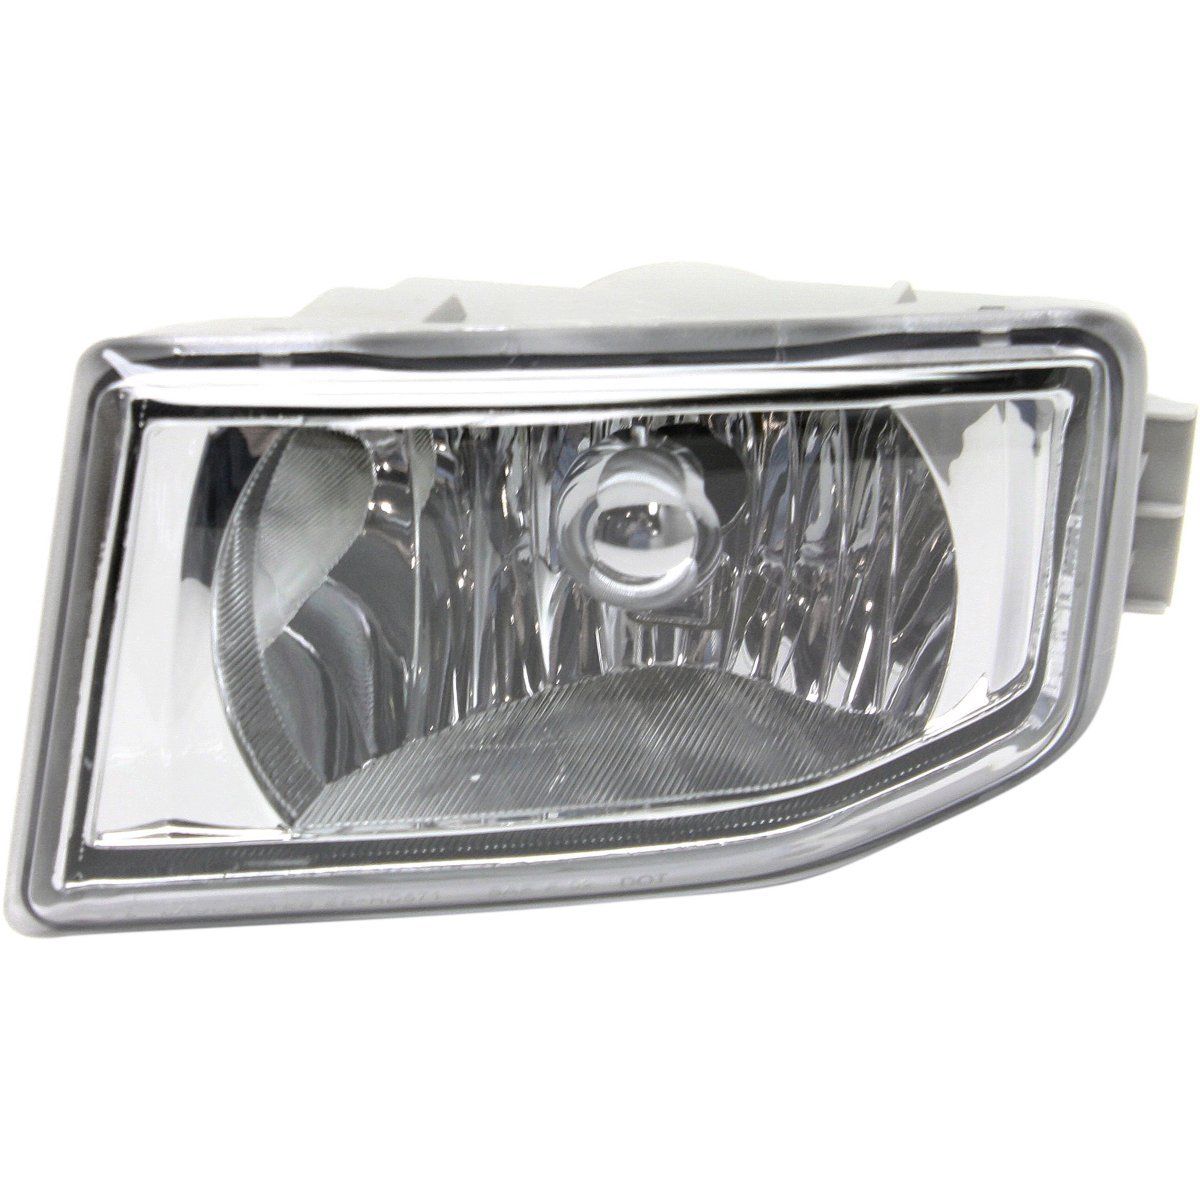 New Replacement Fog Light Driving Lamp LH FOR 2004-06 ACURA MDX